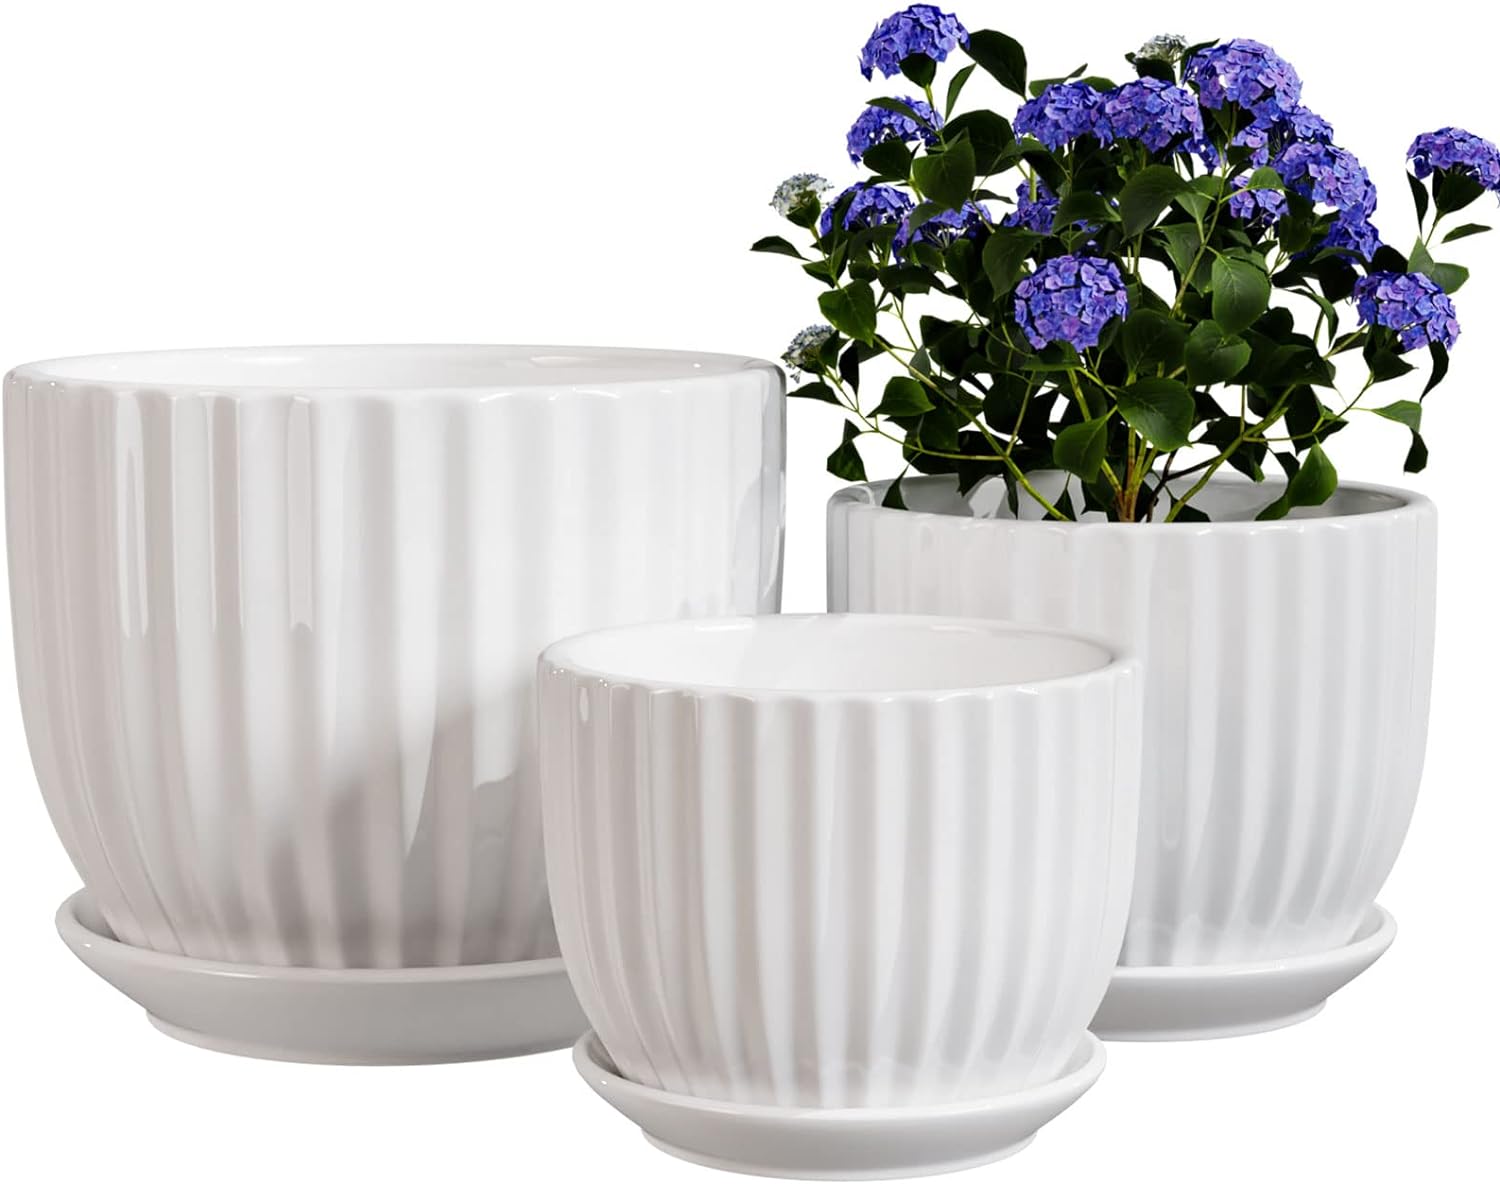 Ton Sin White Plant Pots Set of 3,Indoor Ceramic Flower Pot with Saucers,6.7&5.5&3.9 Inch Small to Medium Sized Planters for Plants,Round Modern Garden Pots